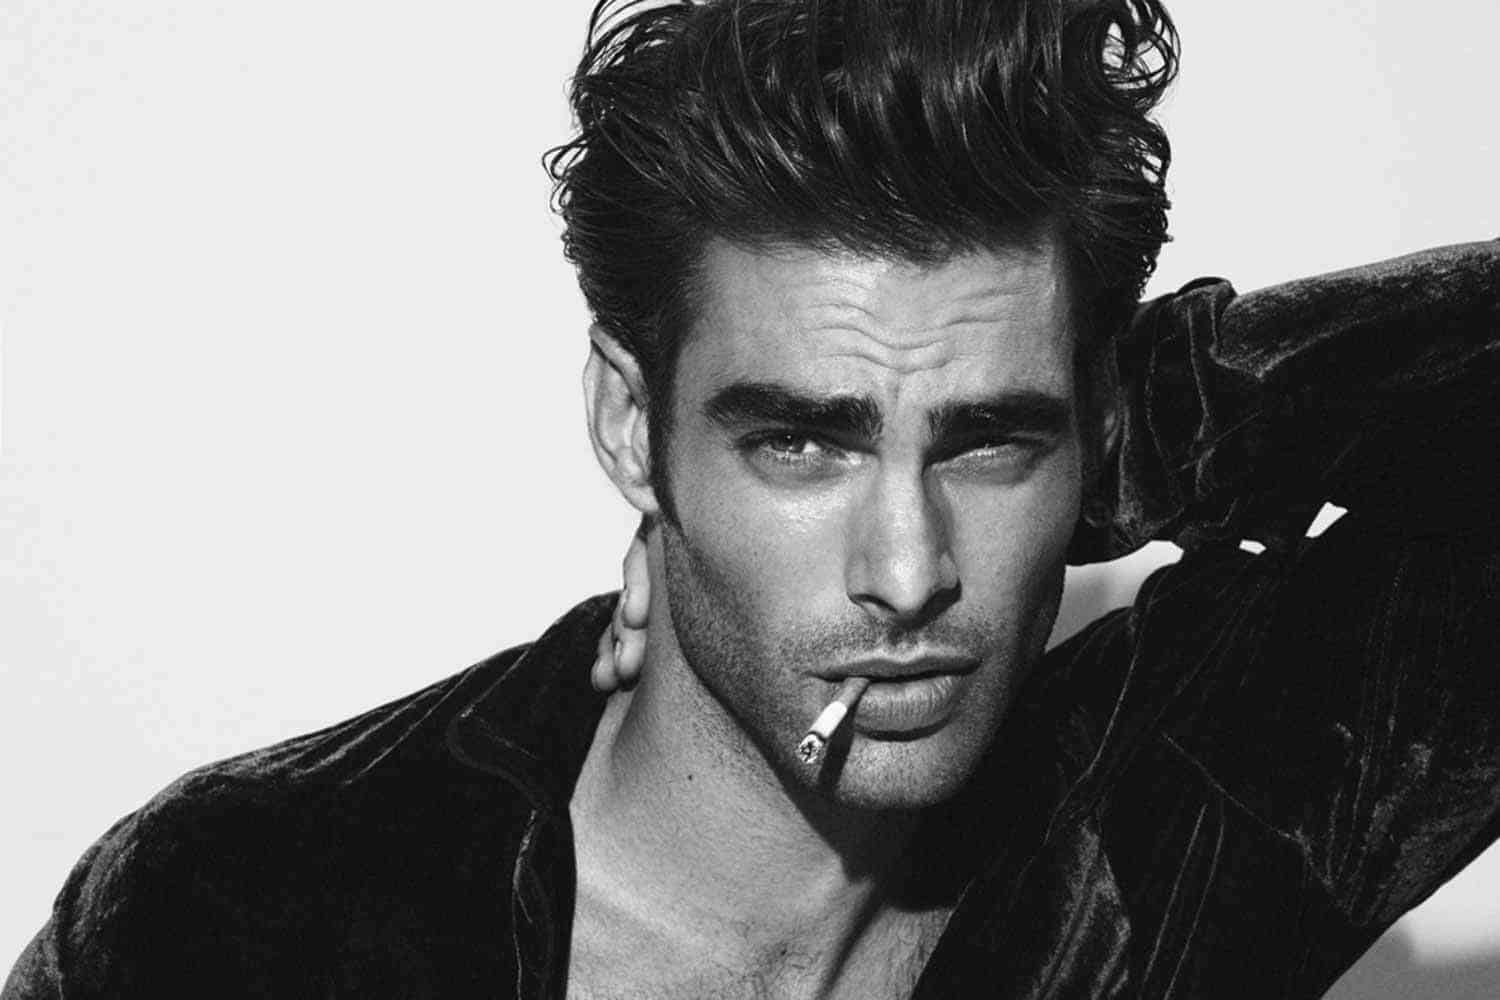 Top 10 Most Handsome & Hottest Models in the World